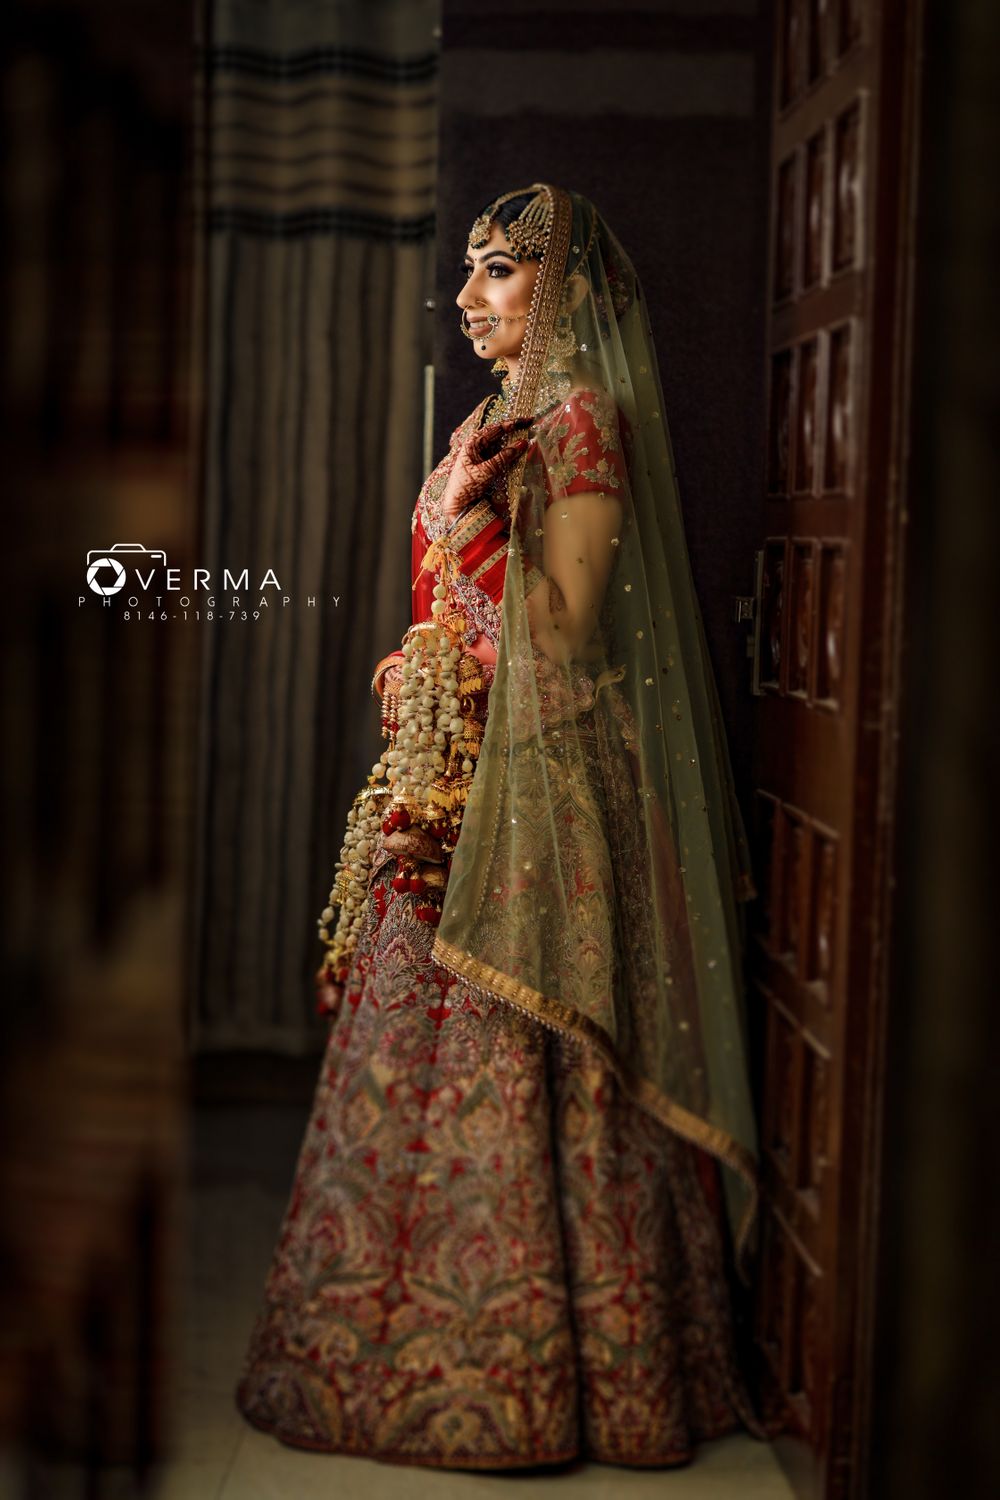 Photo By Verma Photography - Photographers